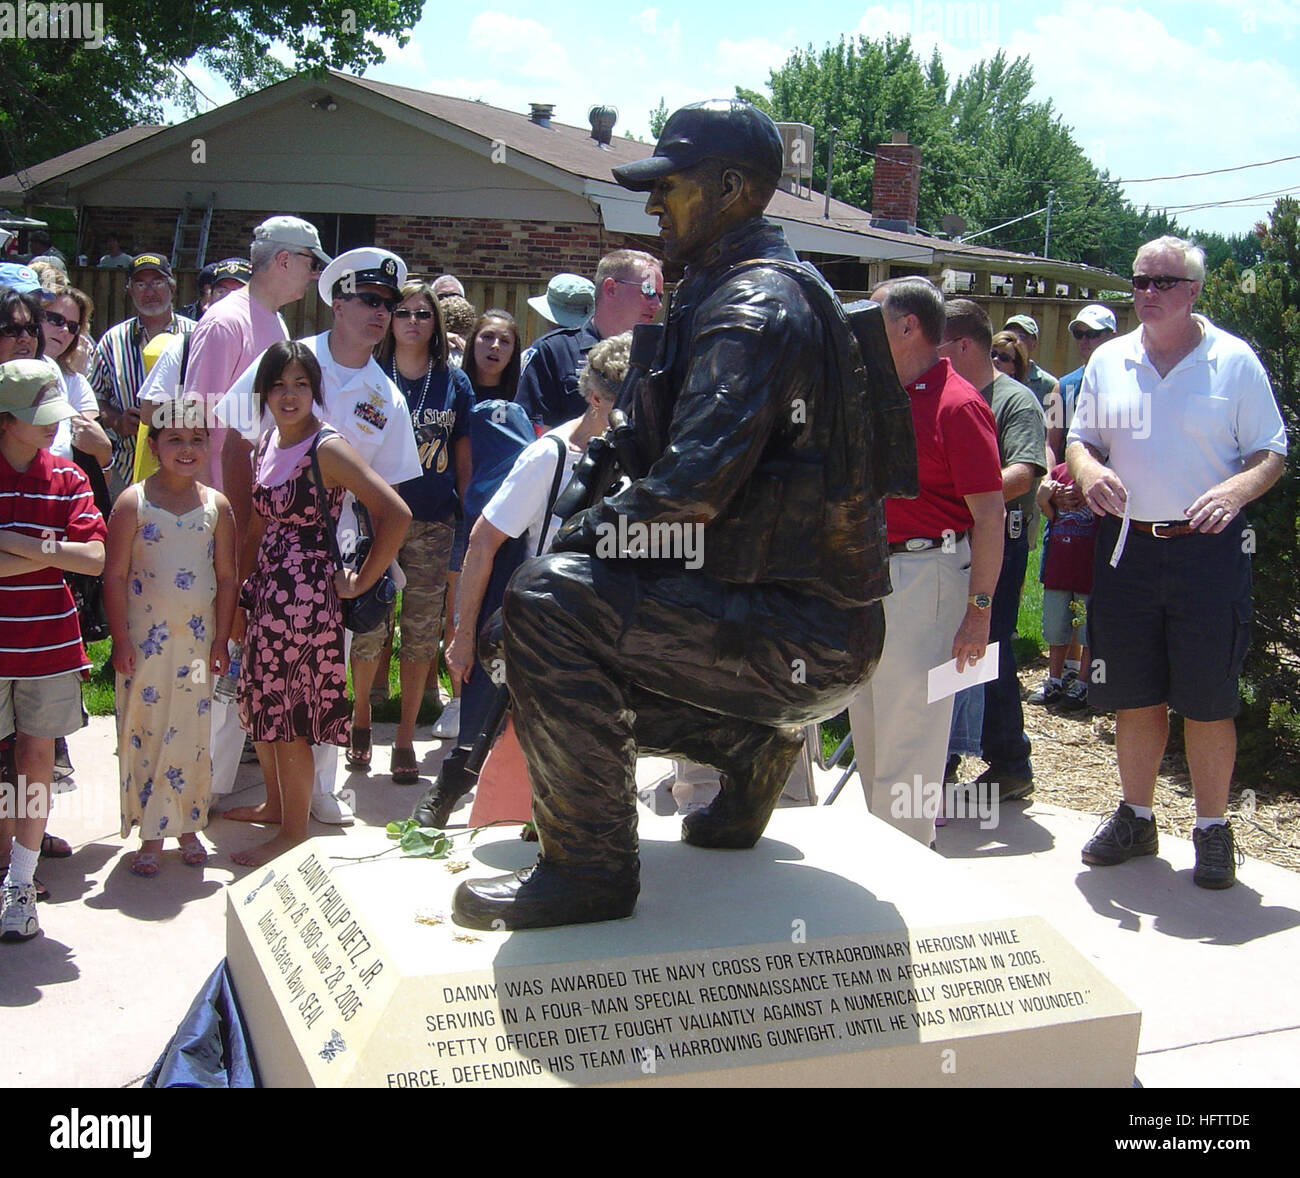 070704-N-0122P-002 LITTLETON, Colo. (July 4, 2007) Ð GunnerÕs Mate 2nd Class (SEAL) Danny P. Dietz was honored by his hometown of Littleton with the dedication of a larger-than-life bronze statue in a park near his childhood family home. An estimated 3,000 people crowded the new park to honor the SailorÕs memory. Guest speakers included The Honorable Donald C. Winter, Commander, Naval Special Warfare Command, Rear Admiral Joseph Kernan; United States Congressman Tom Tancredo; Medal of Honor recipient and Petty Officer (SEAL) Mike Thornton and Mrs. Tiffany Bitz, Dietz' sister. The master of cer Stock Photo